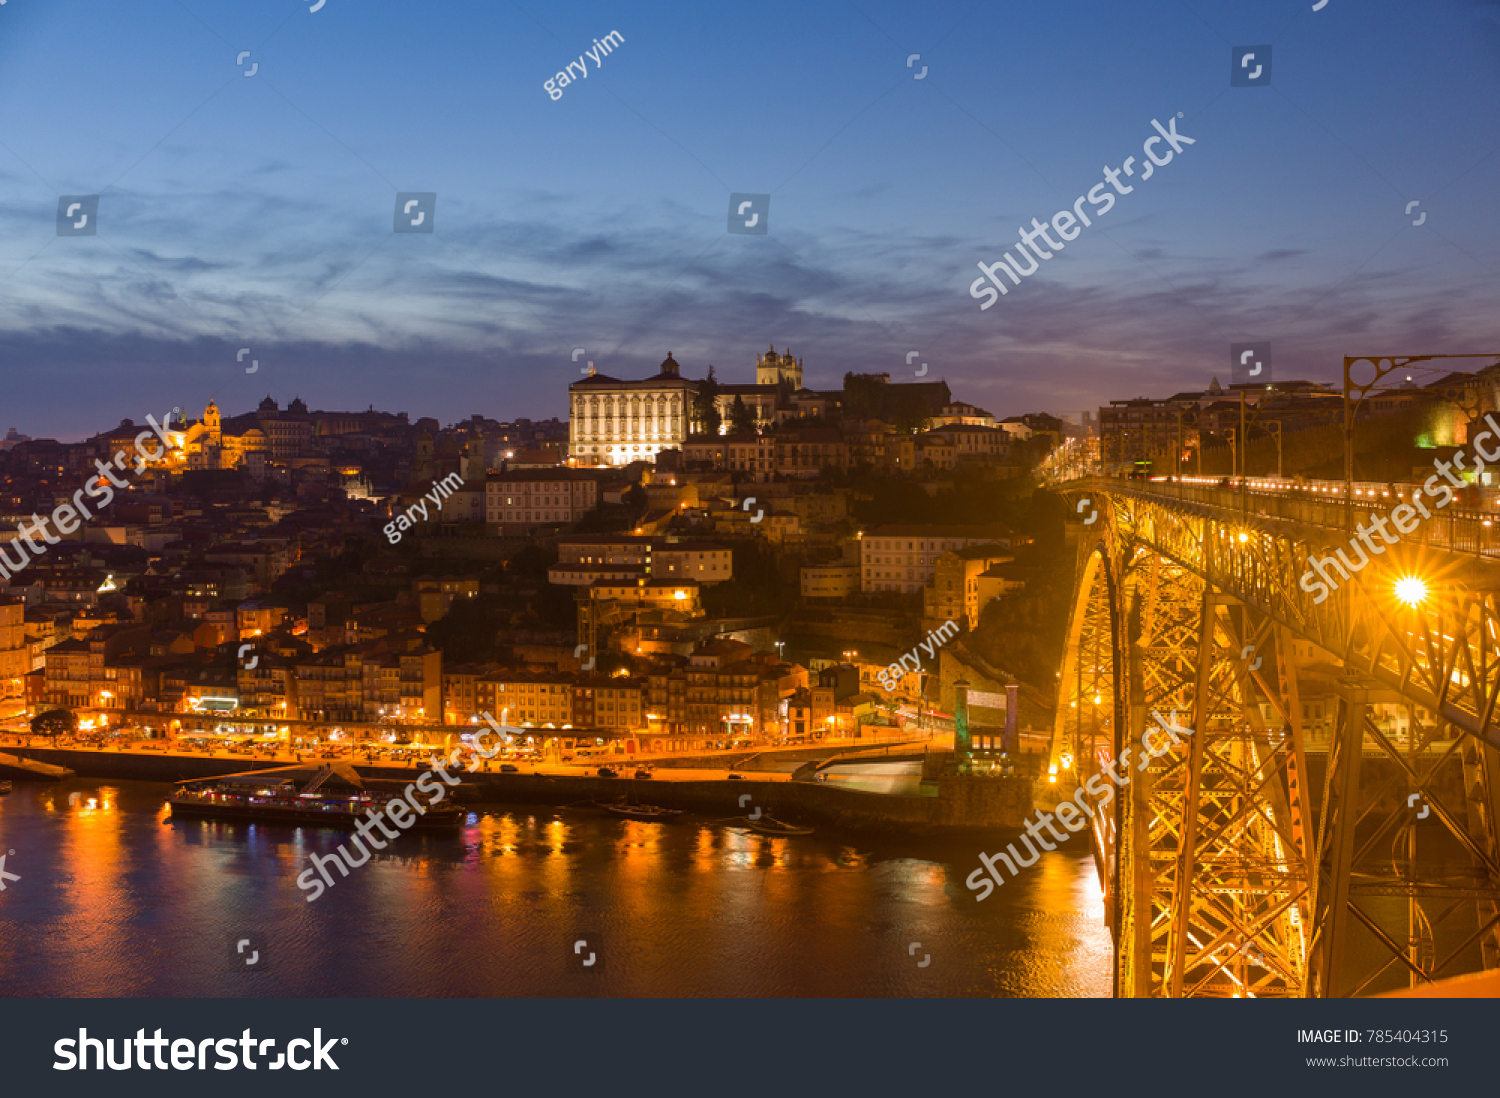 PORTUGAL, PORTO - May 20: Overview of Old Town of Porto, Portugal at dusk on May 20, 2016 #785404315